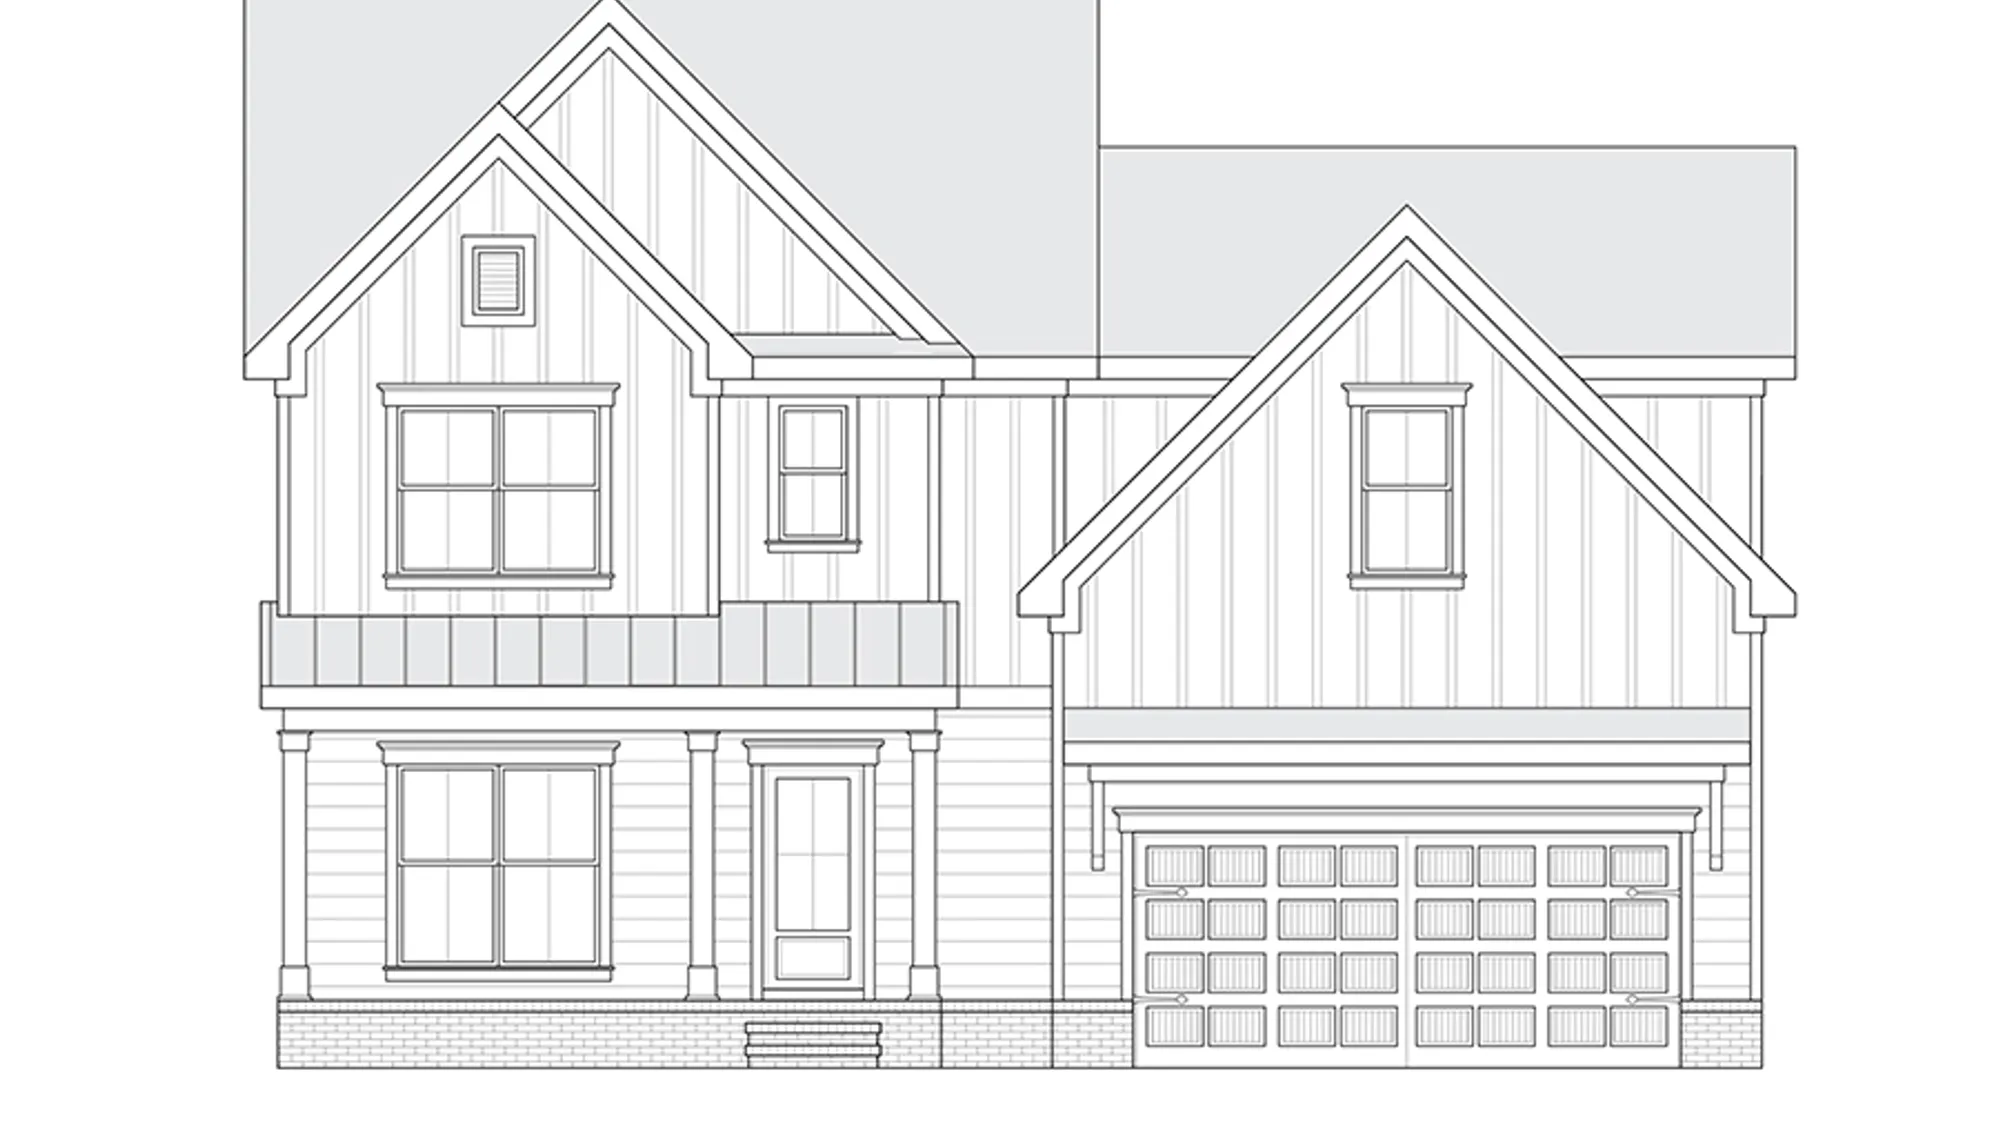 Oliver GY, two-story home elevation